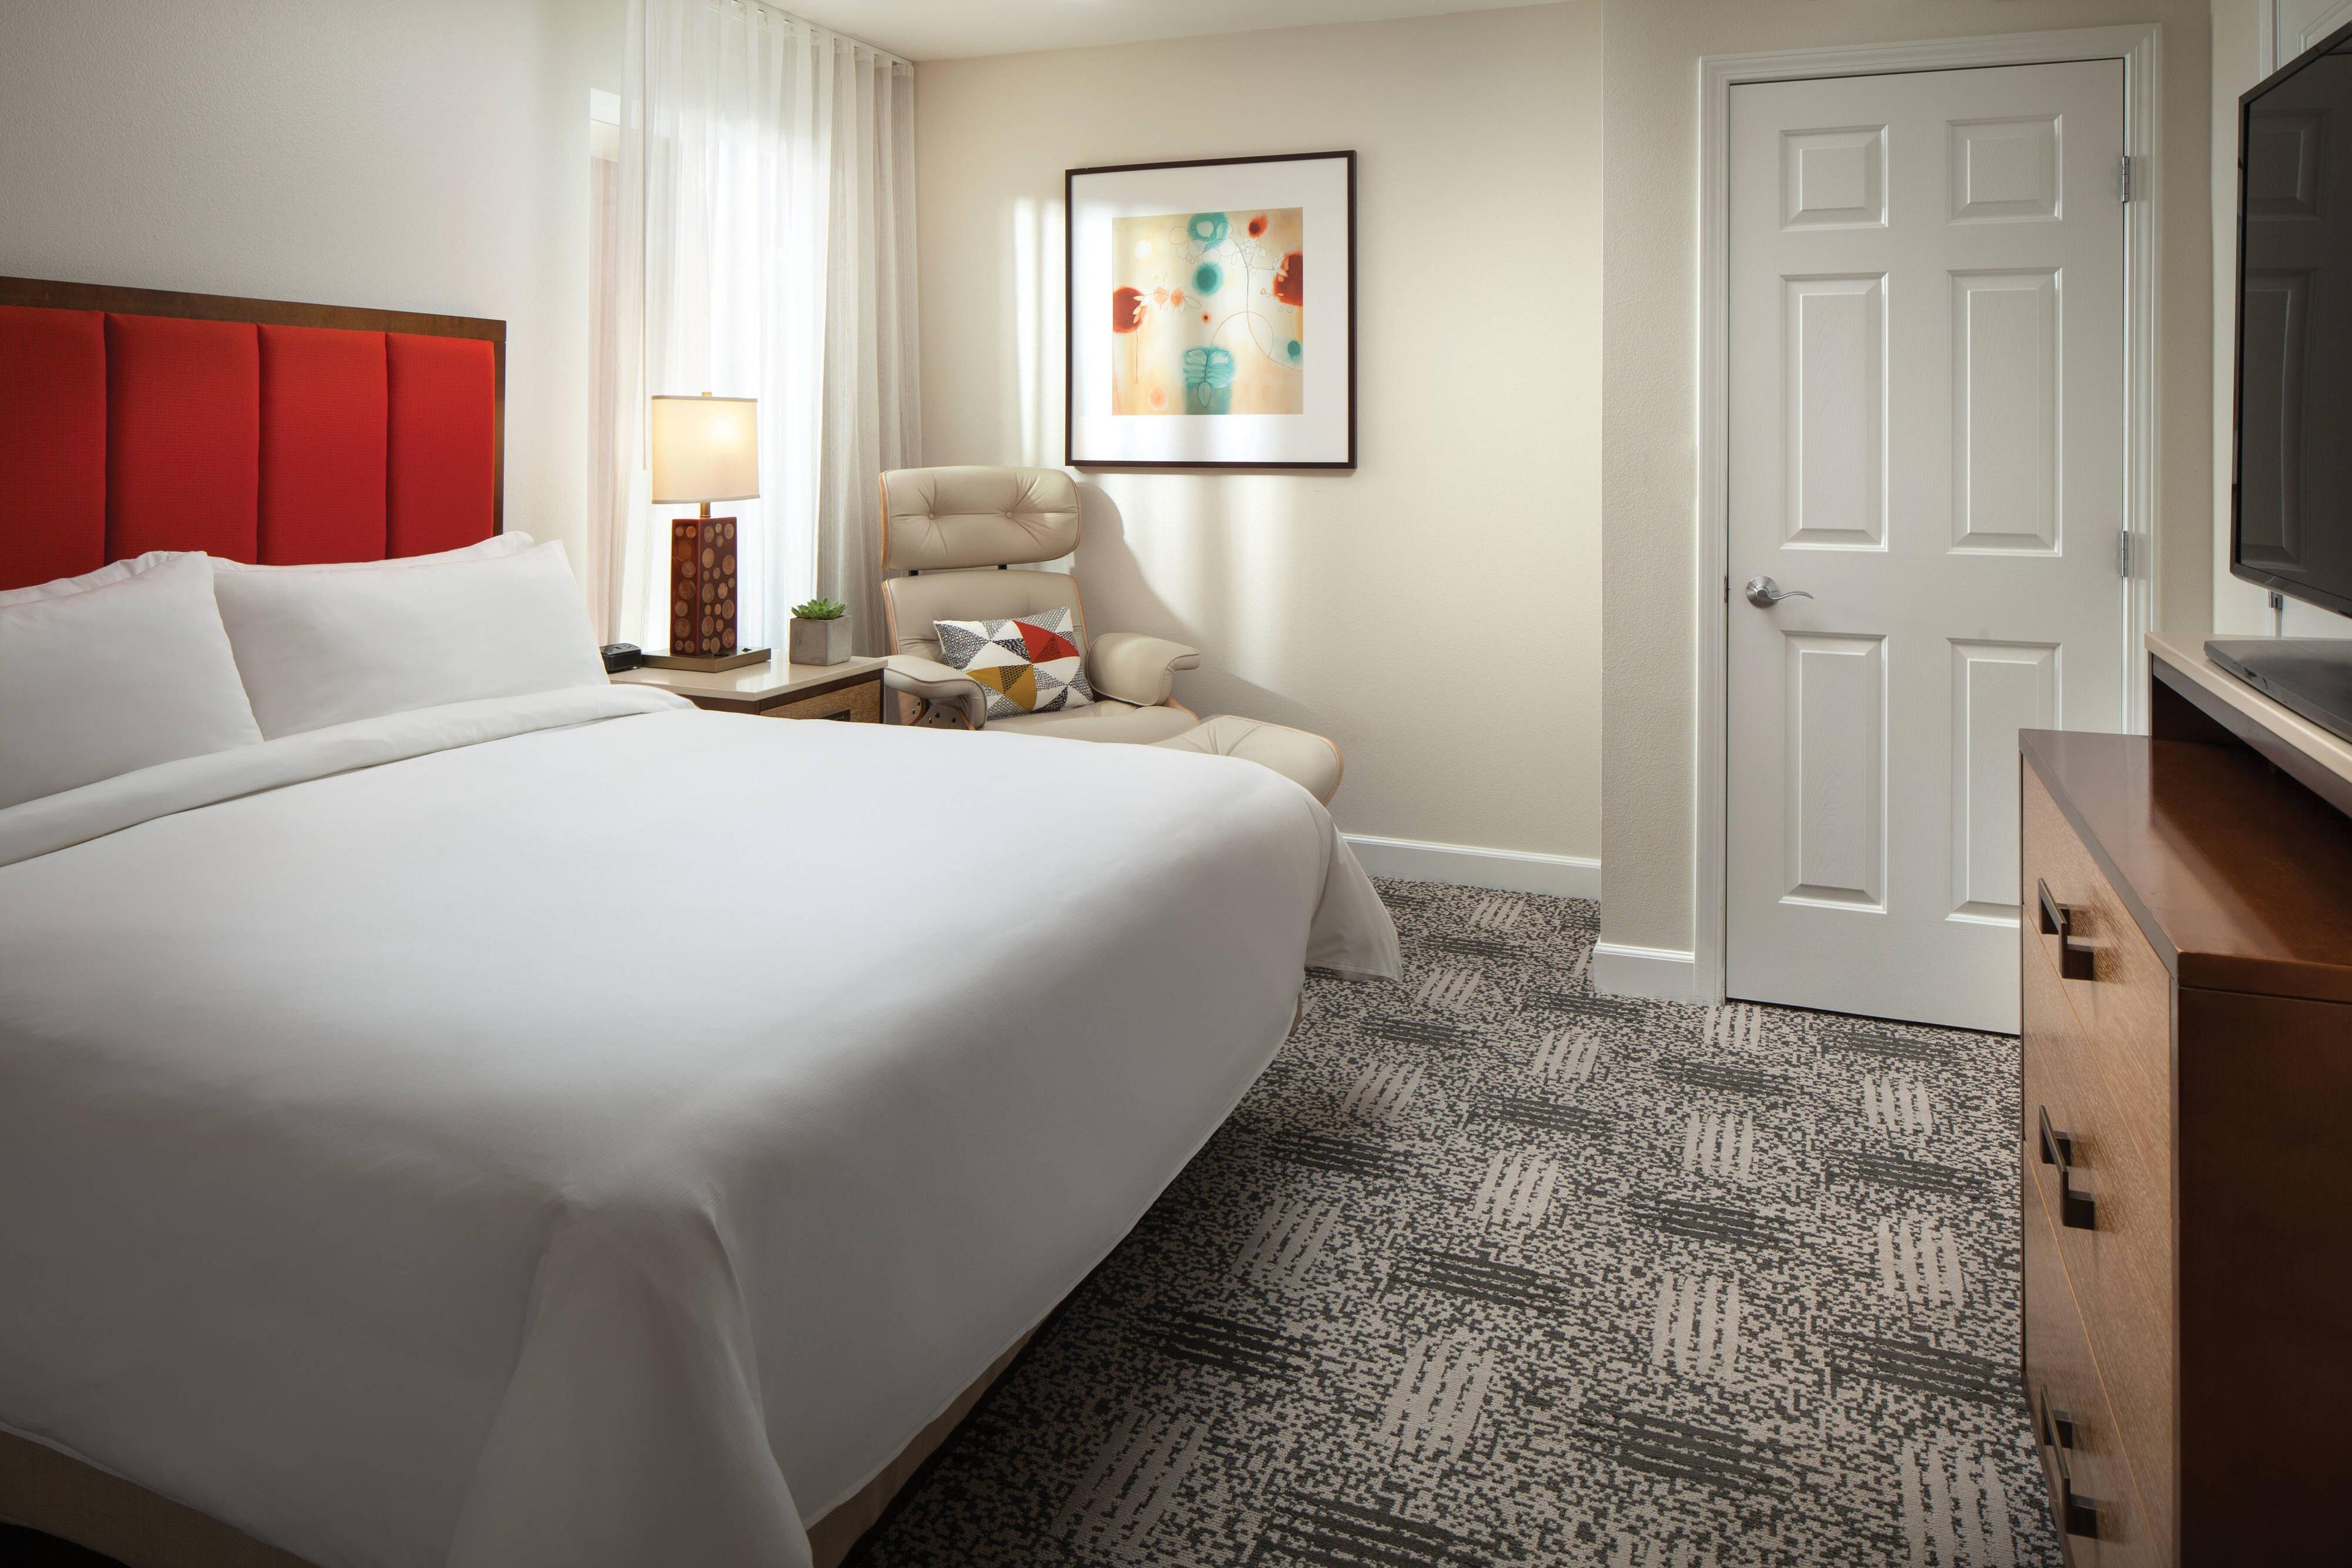 The comfortable master bedroom offers a king-size bed with plush bedding for a restful night's sleep.